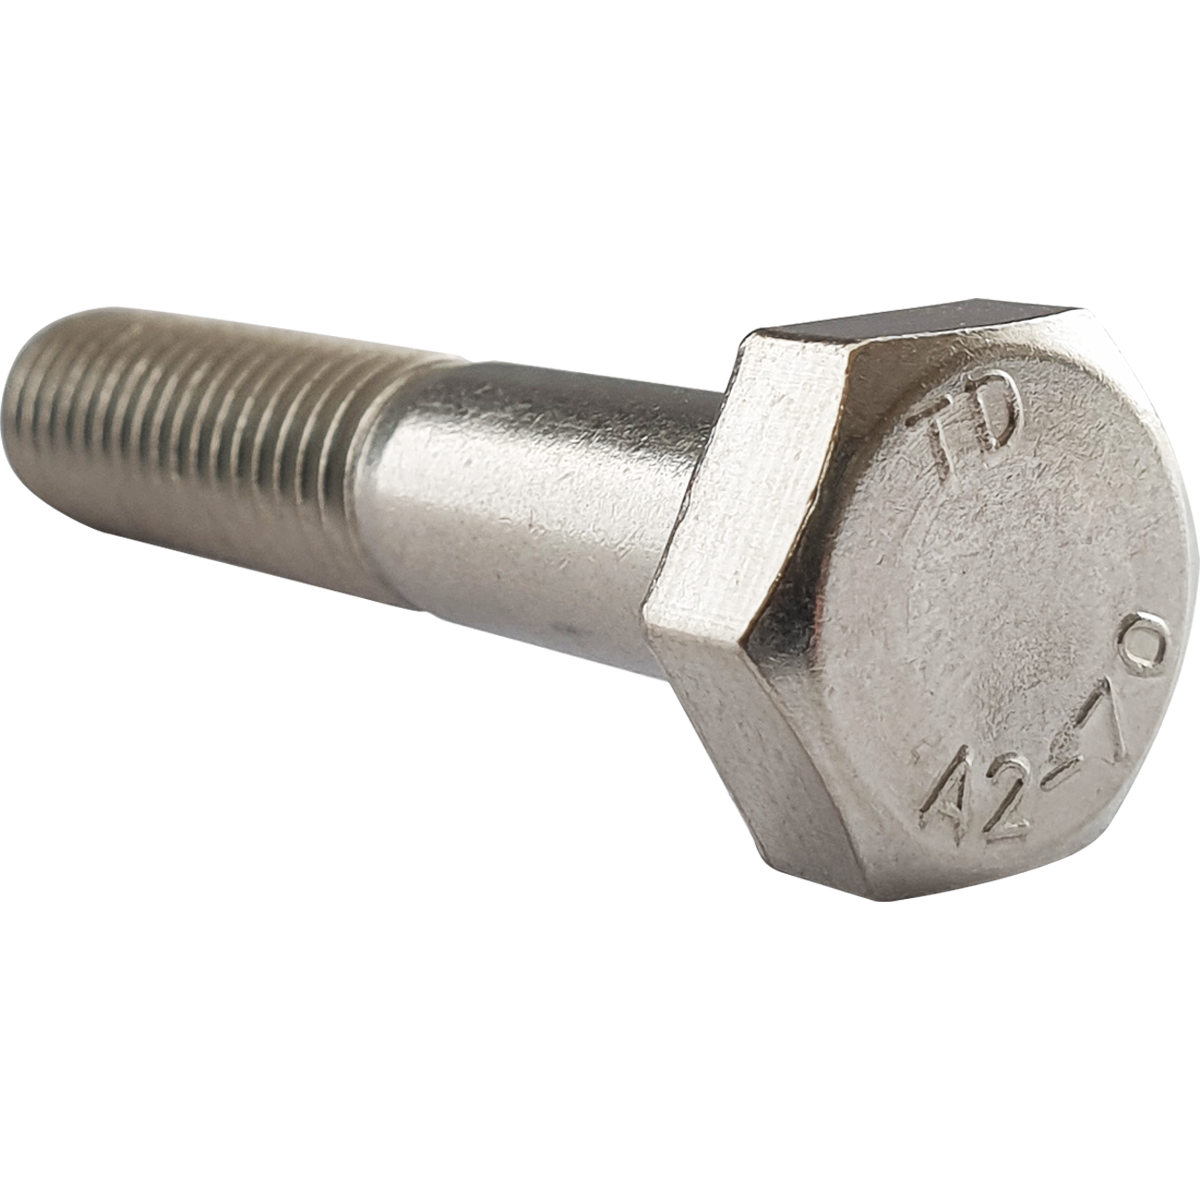 Metric, A2 Stainless Steel, Part Thread Hex Bolts, also known as hexagon bolts, available in various sizes at competitive prices.